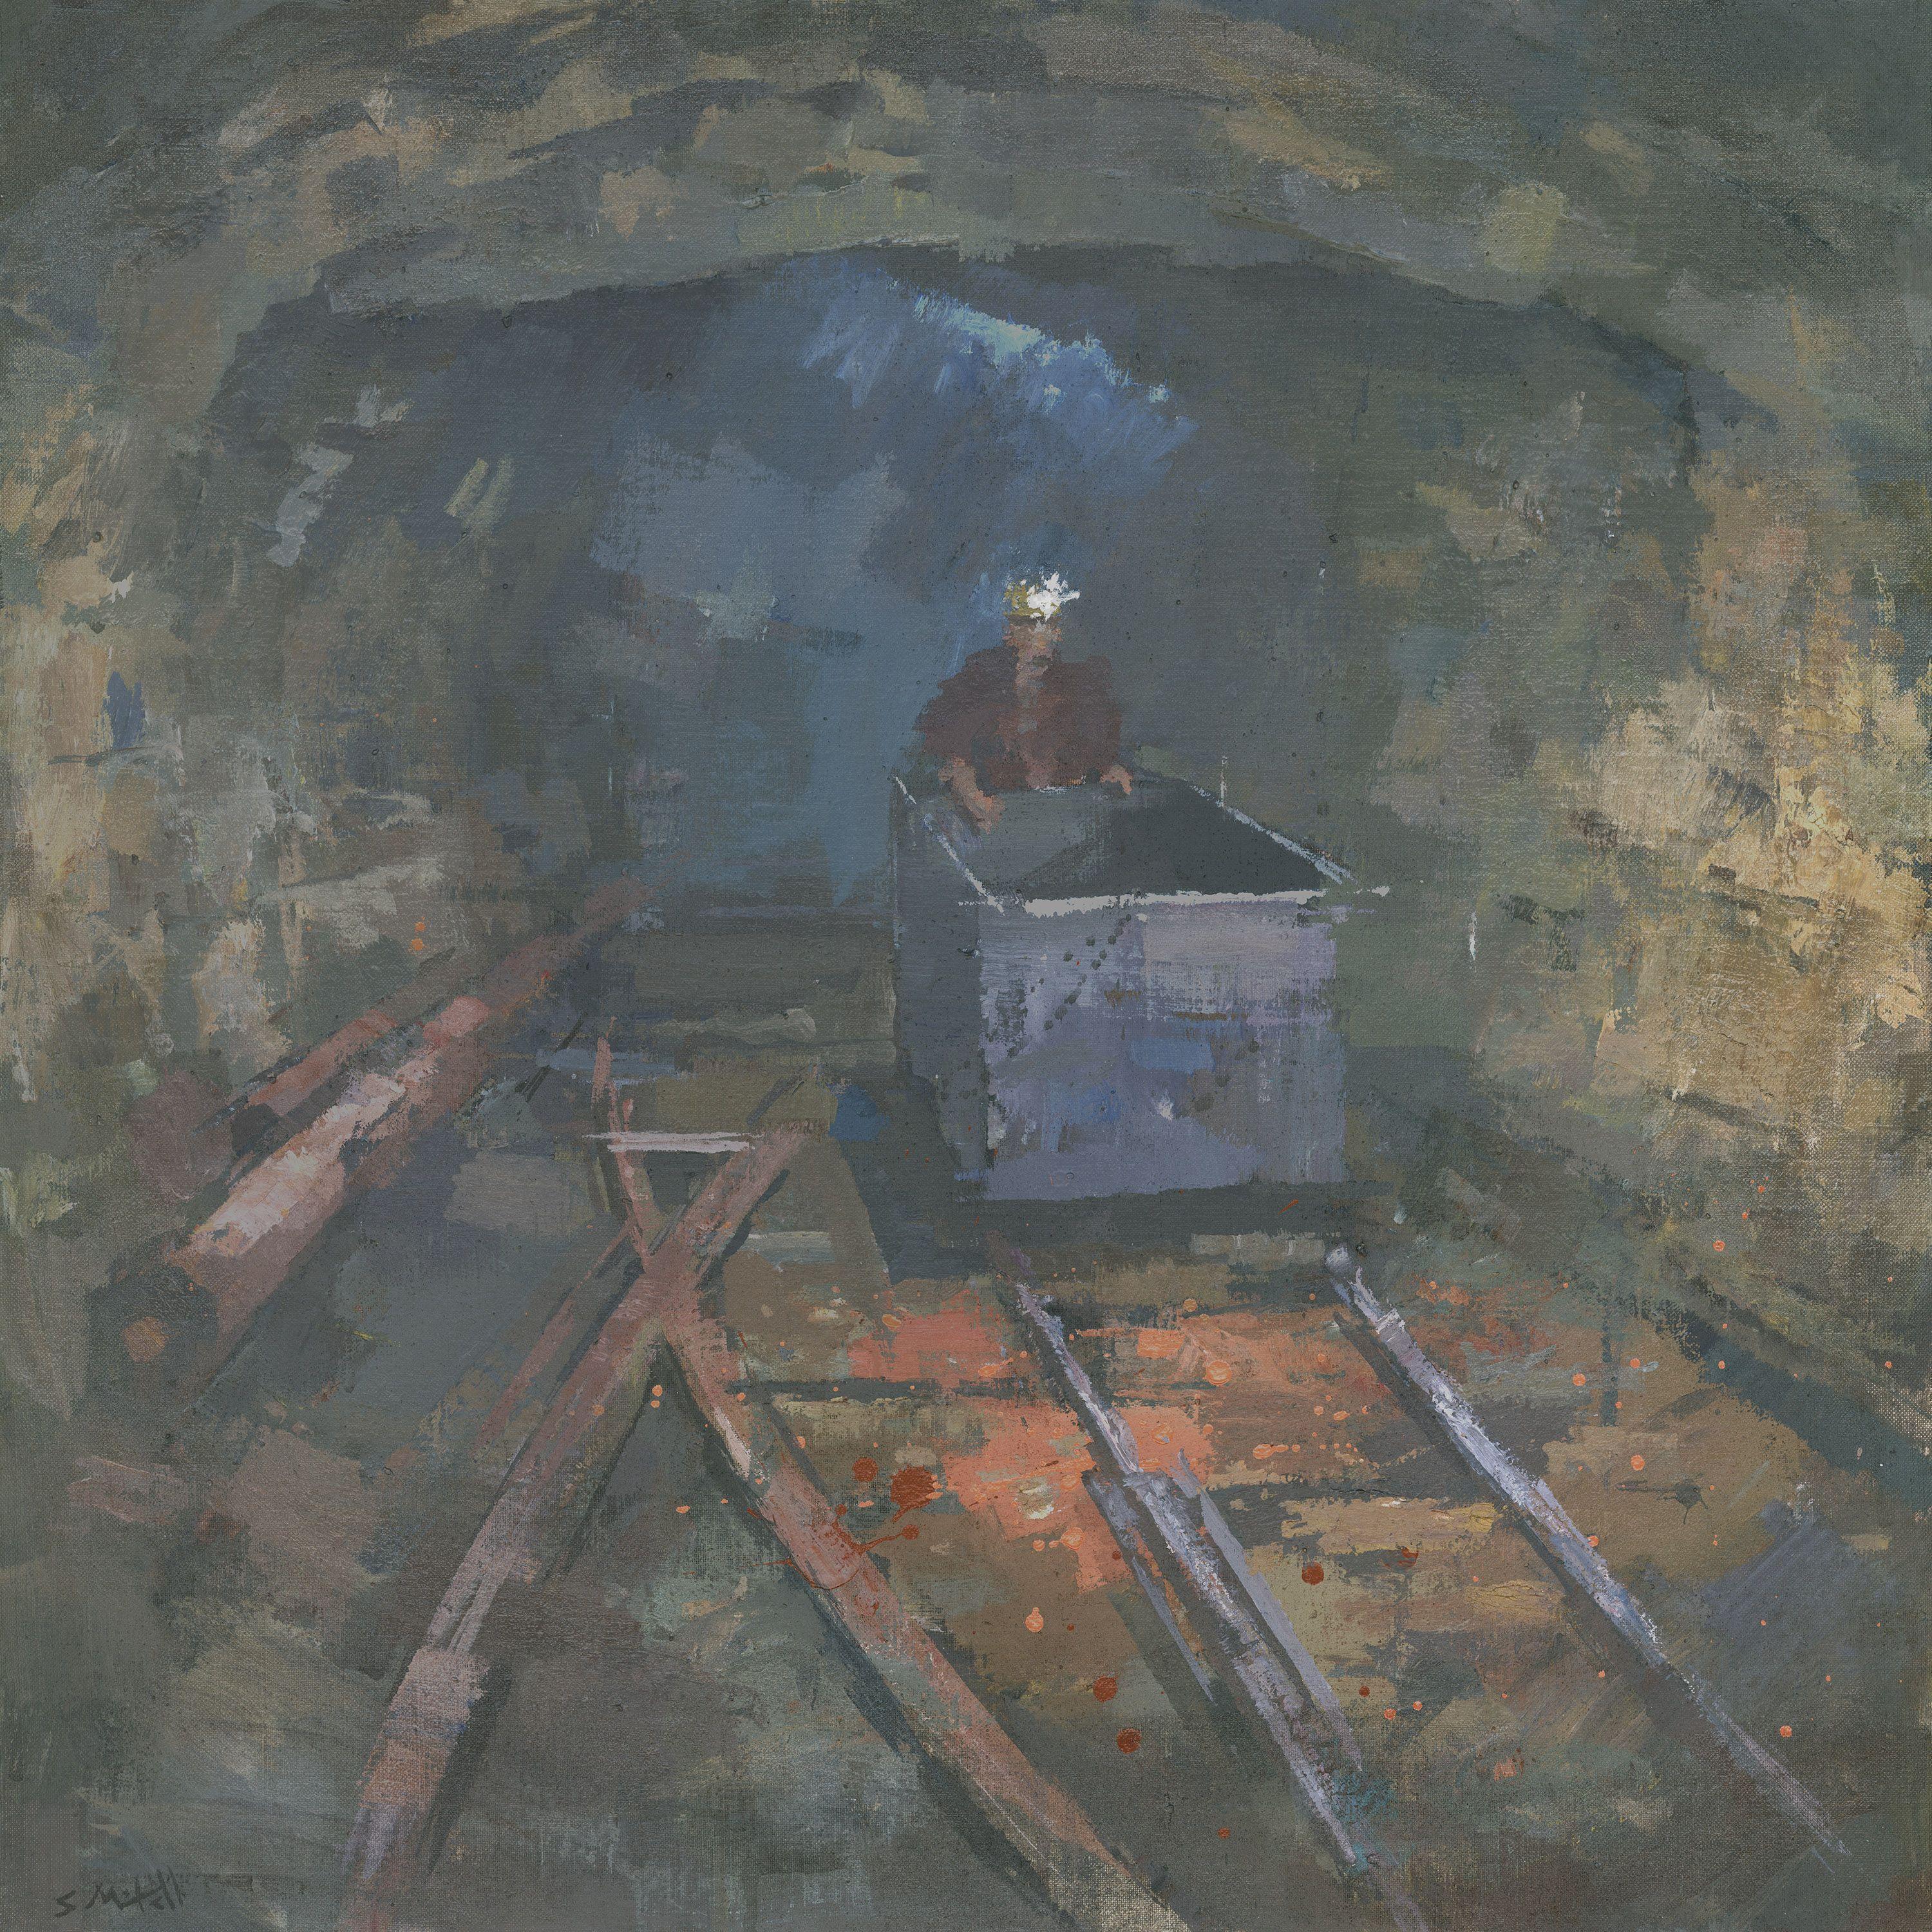 This is an original, one of a kind painting. A miner pushes a cart at South Crofty tin mine in Cornwall. The headlamp highlights the rich earth colours of the tunnel. South Crofty has a long history of copper and tin mining, going back over 400